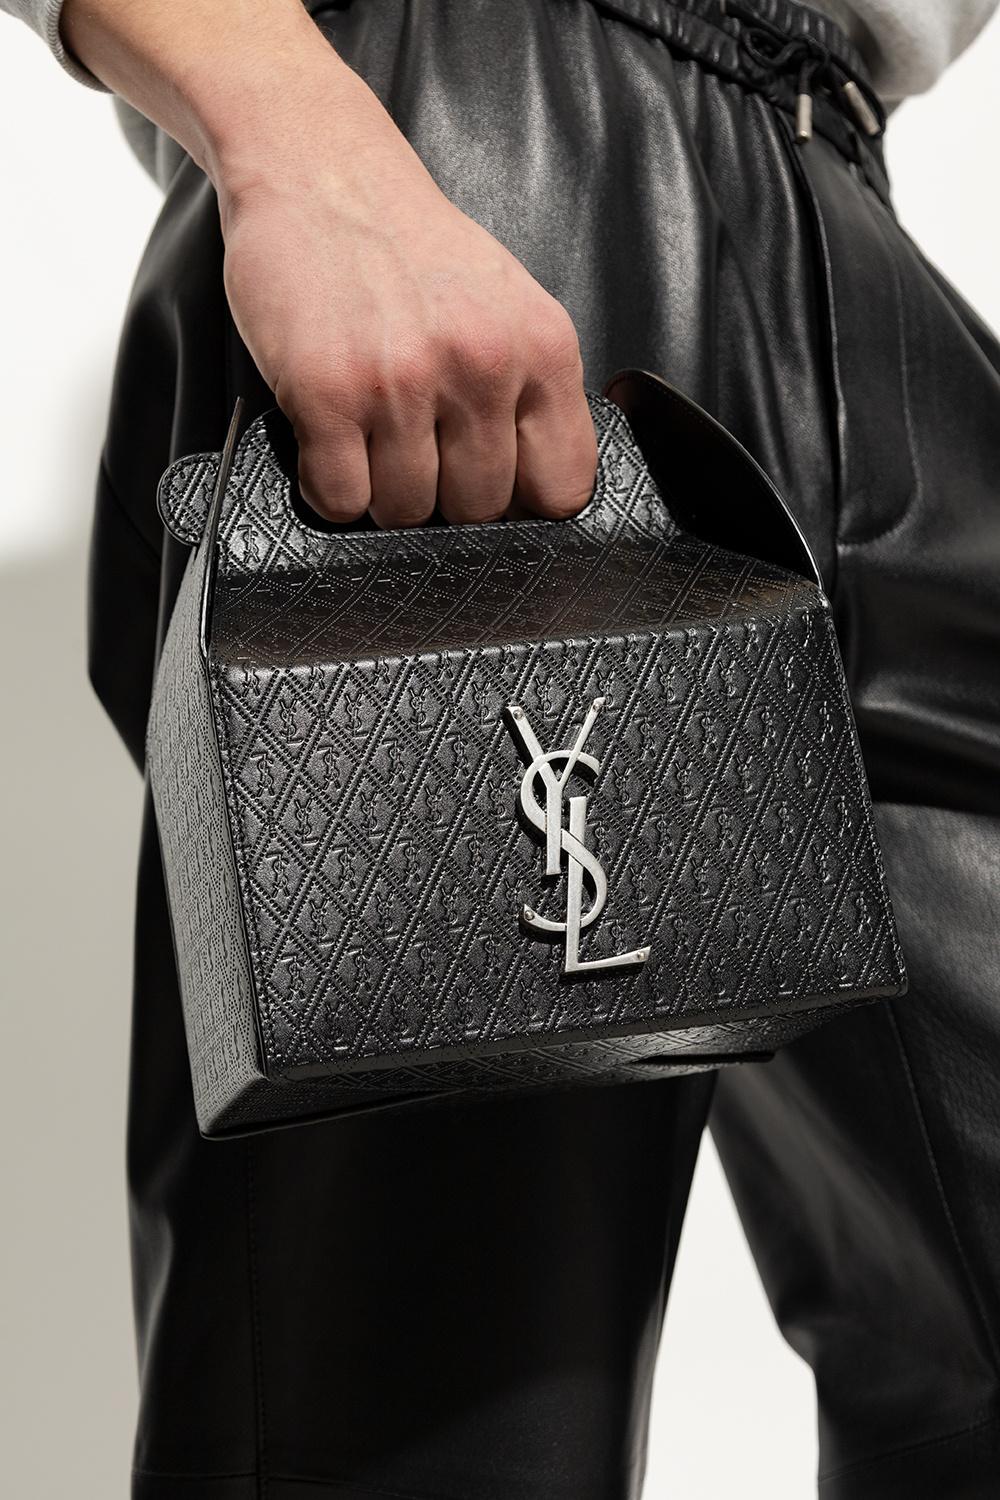 Saint Laurent Introduces a Takeaway Box Bag Made of Calfskin Leather